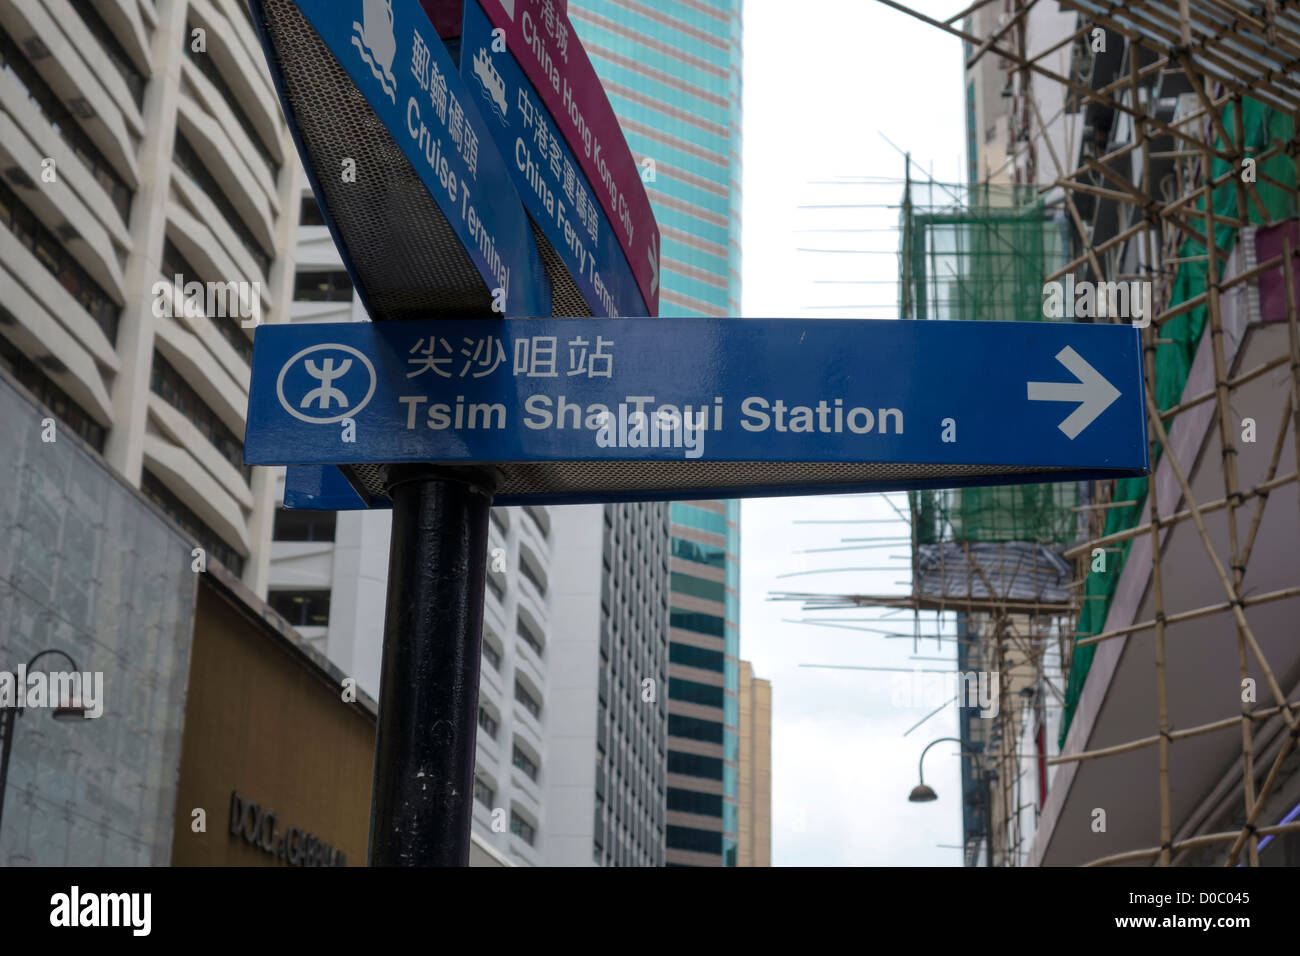 Chinese and English direction signs in Hong Kong Stock Photo